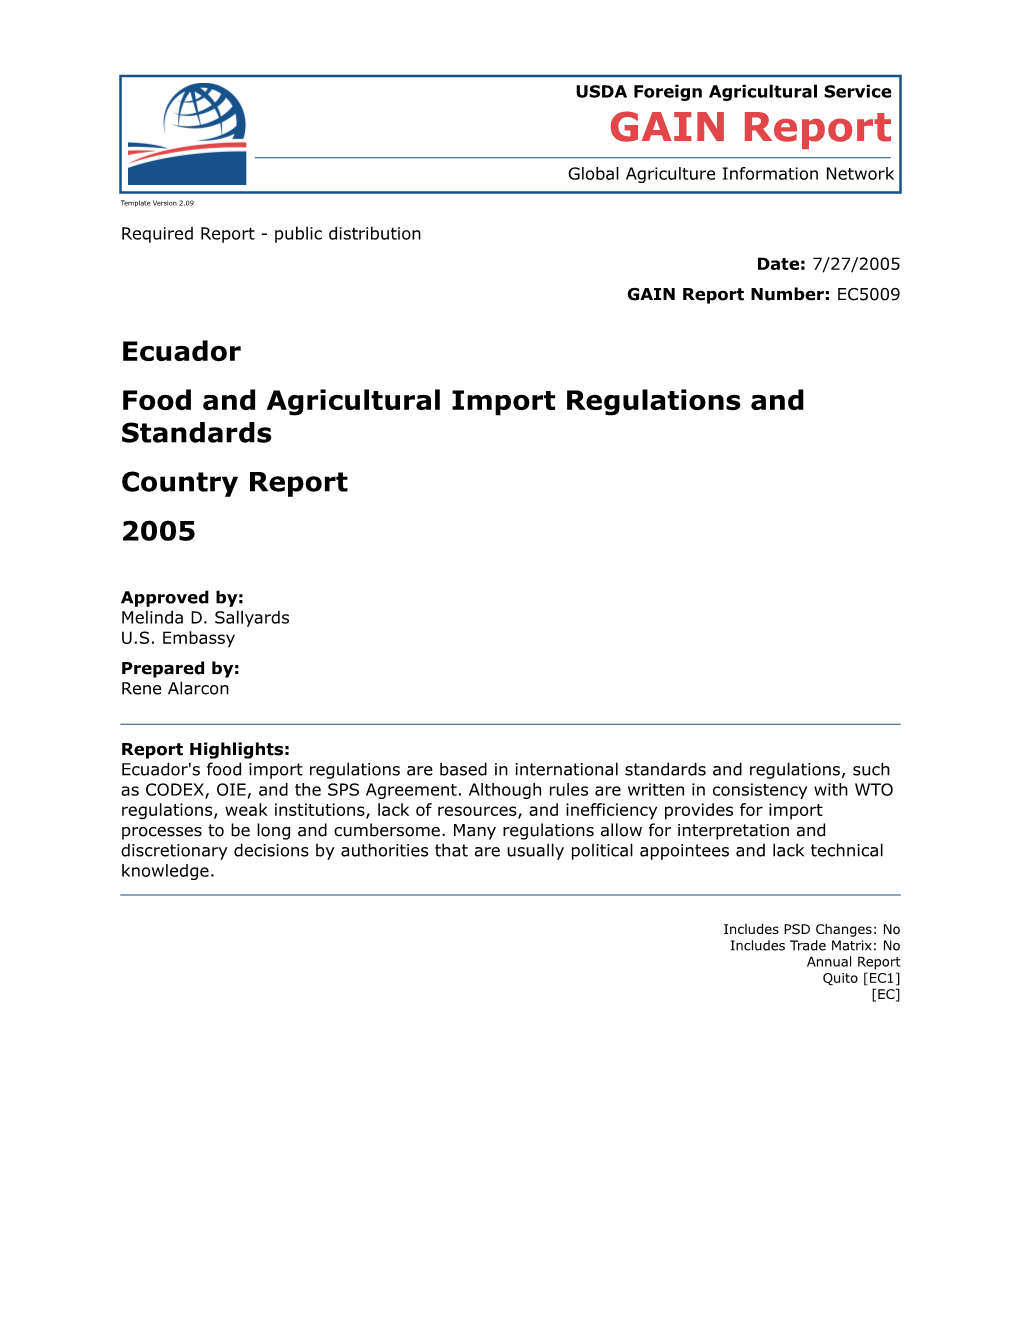 Food and Agricultural Import Regulations and Standards s7